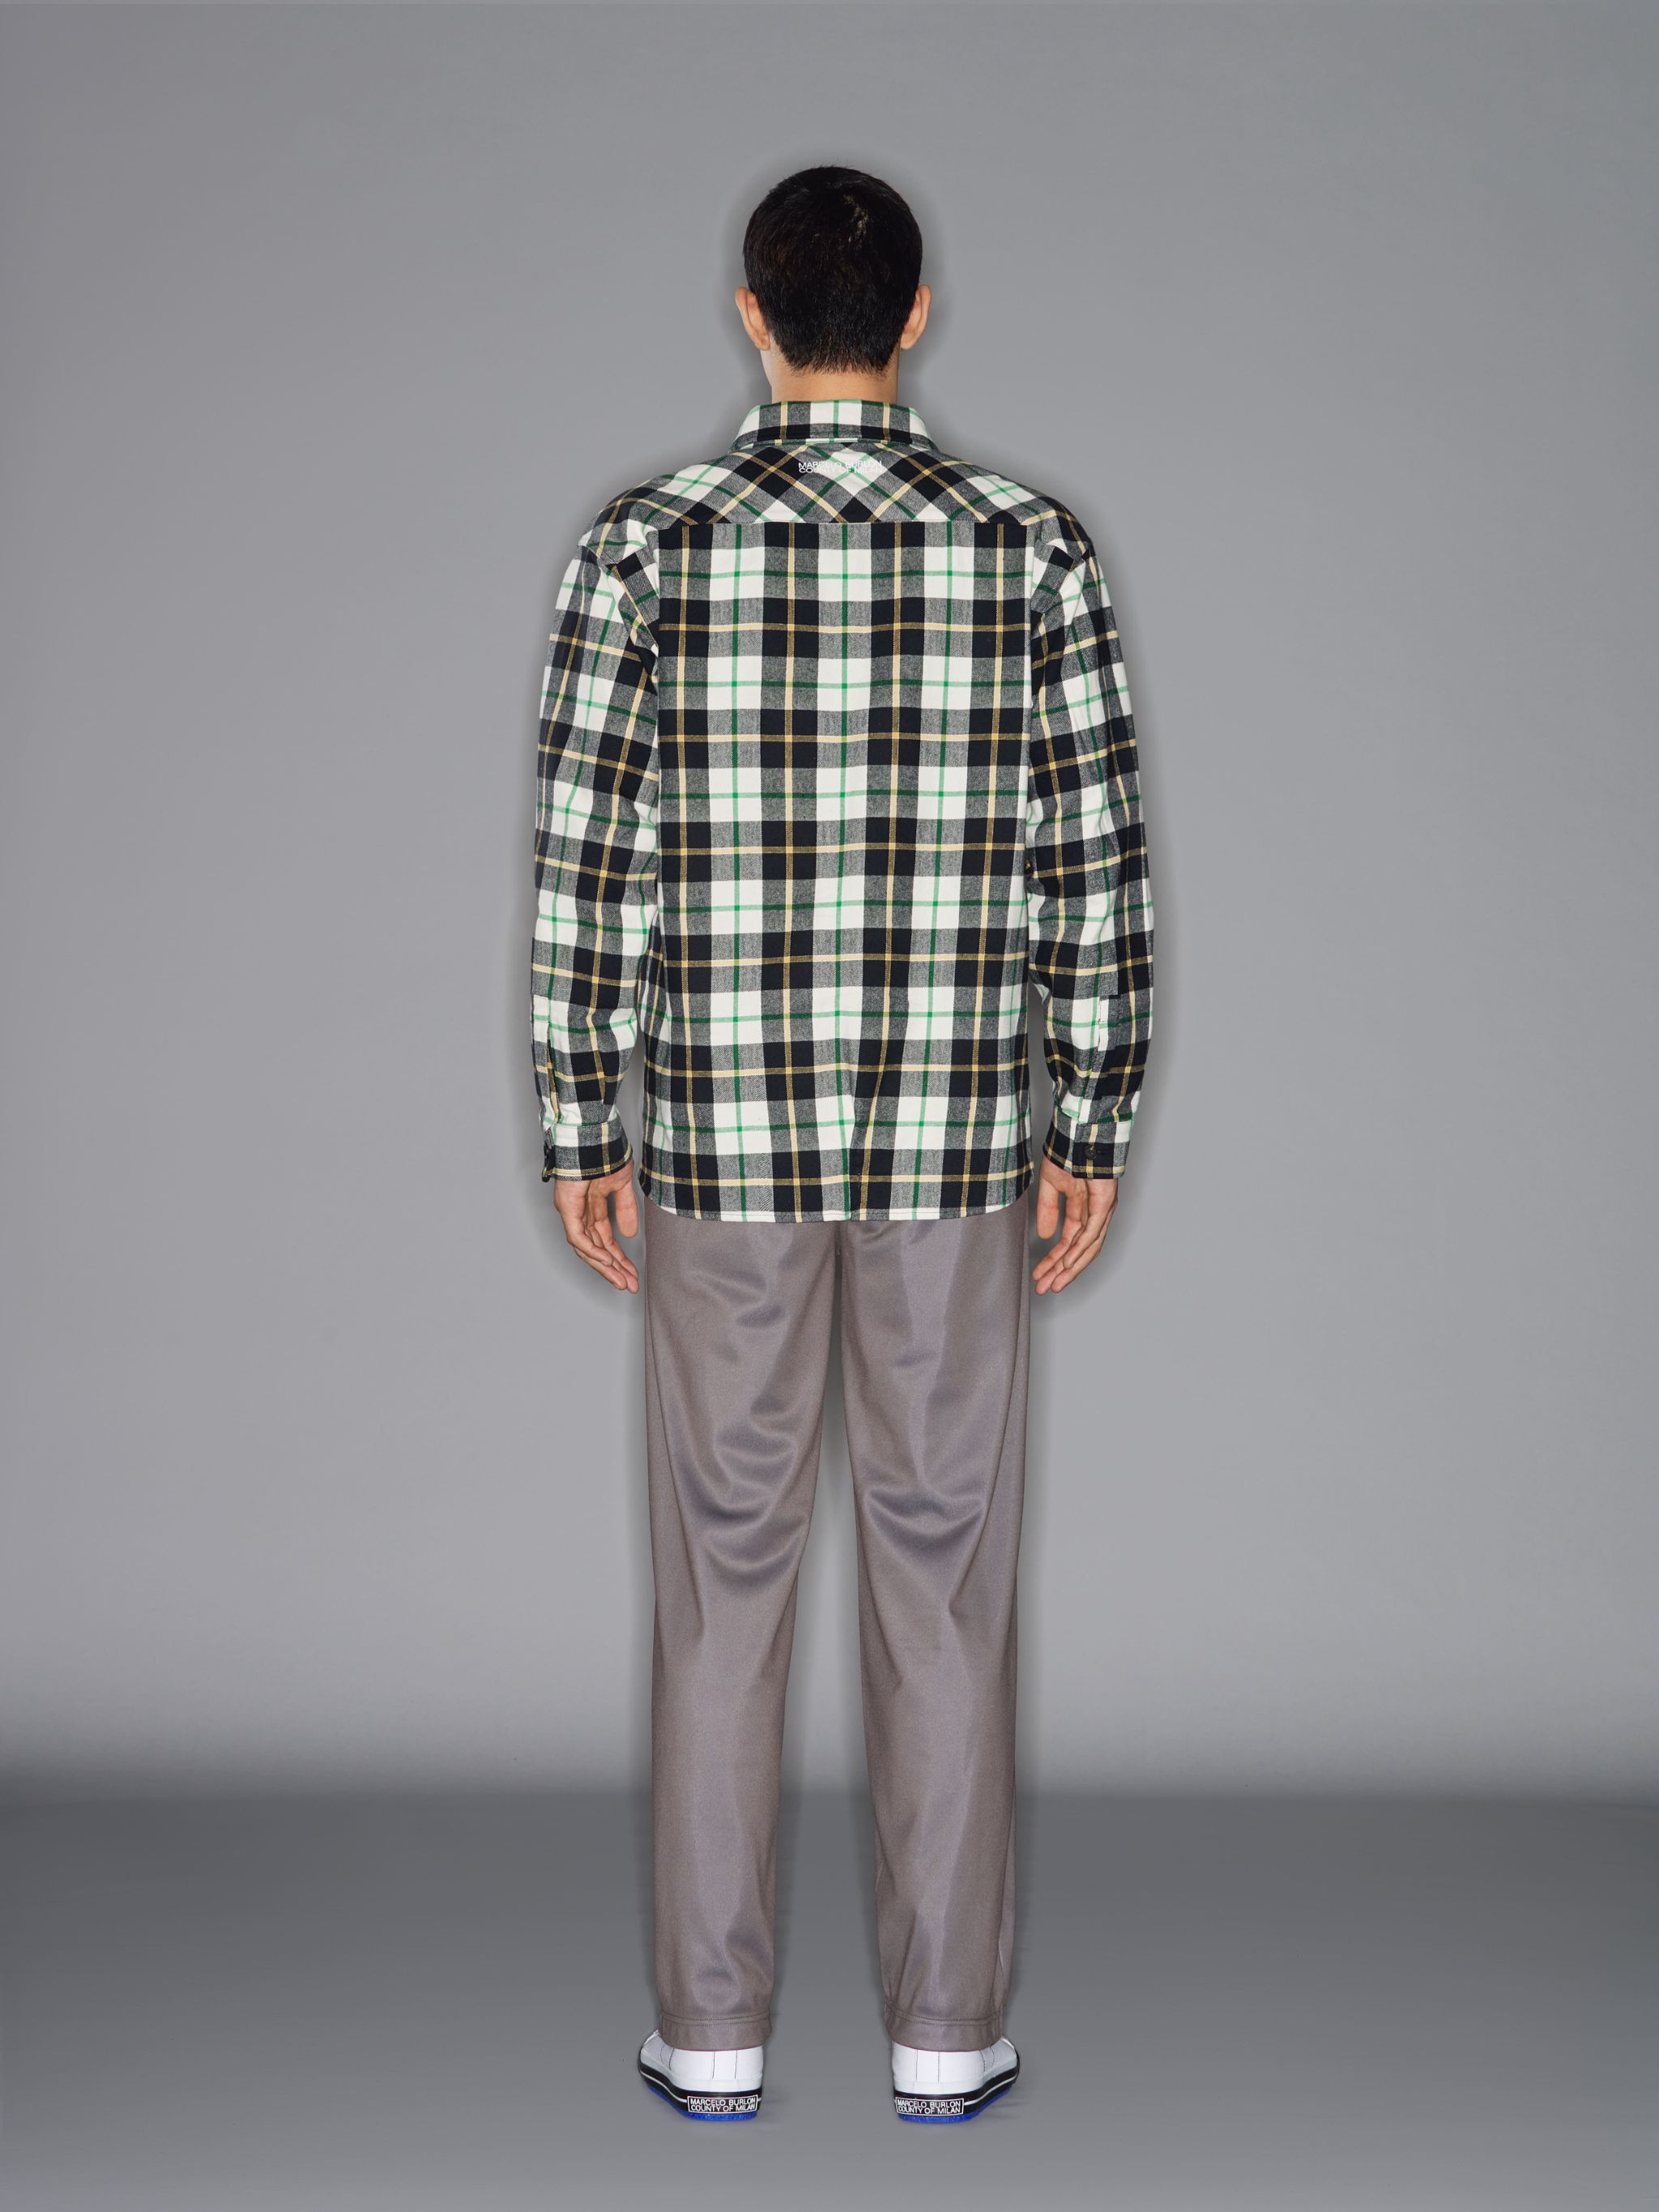 White/green/grey recycled cotton-blend Feather checked shirt from Marcelo Burlon County of Milan featuring logo print embellishment, check print, classic collar, front button fastening, long sleeves, buttoned cuffs and straight hem. POSITIVELY CONSCIOUS: This Planet Conscious product is crafted from certified recycled or upcycled materials, which helps you make a better choice for the environment as they generate less energy, save water and reduce the need for new raw materials. For recycled synthetic clothing products we highly recommend using a microfibre-catching washing bag to ensure that no microplastics that can pollute water are released in the process..